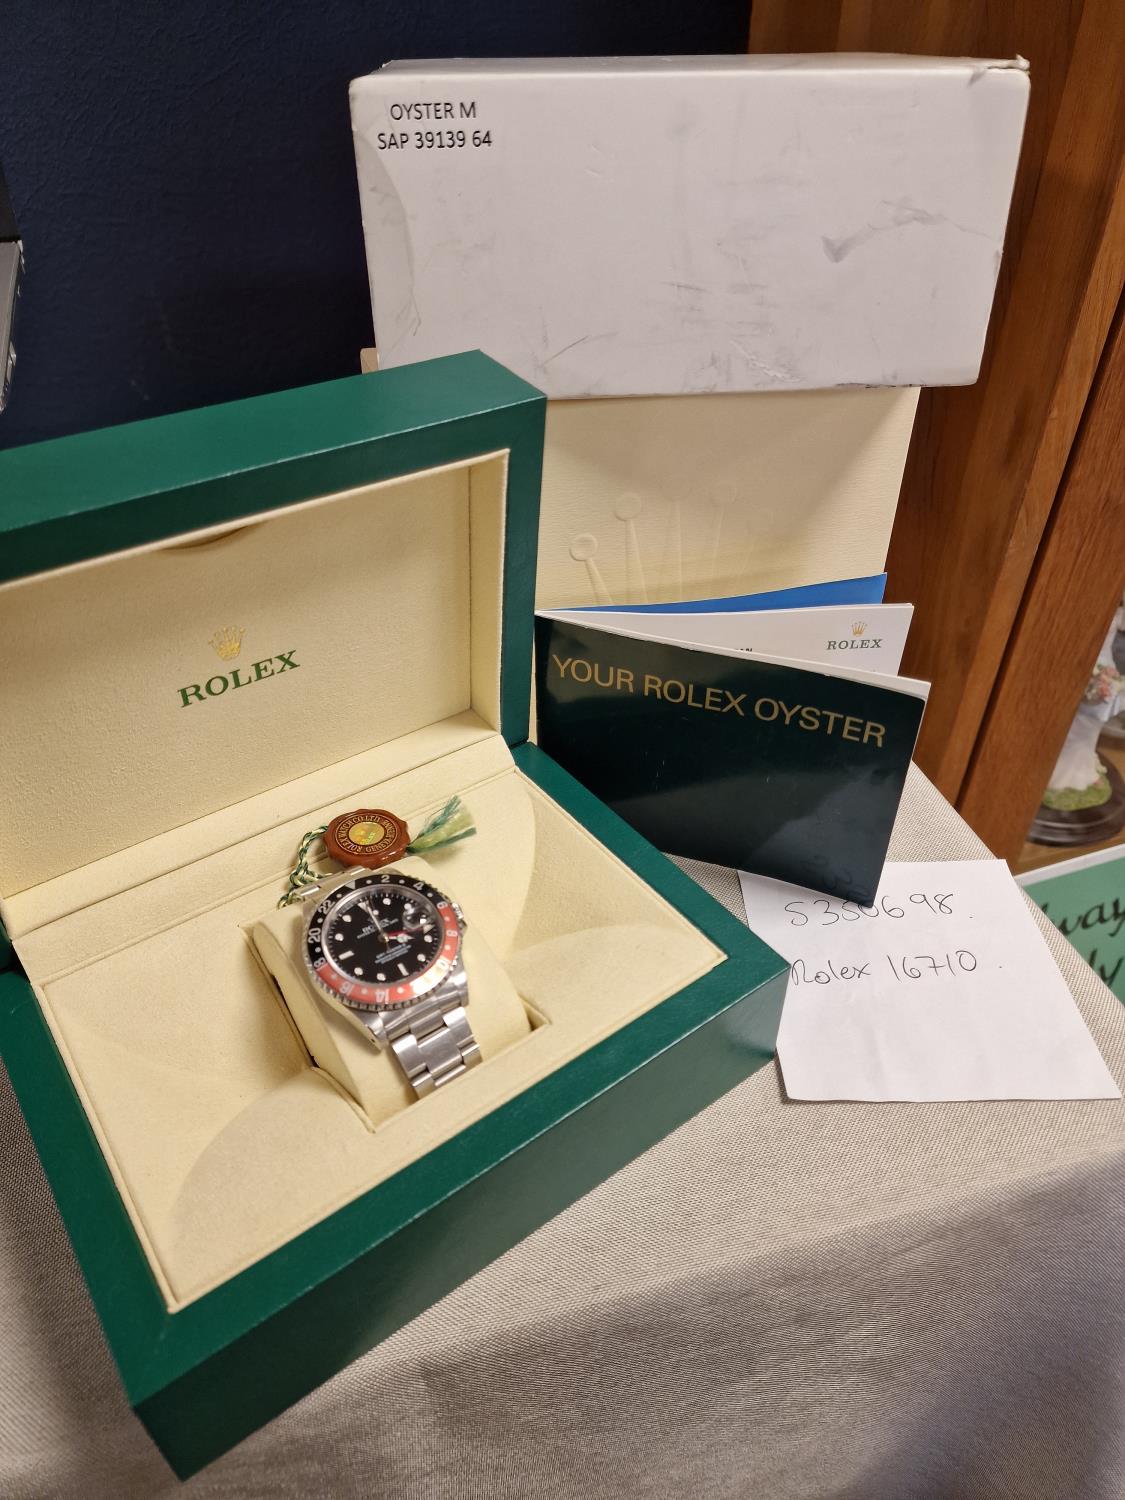 Boxed Rolex GMT II Chronometer Oyster Wrist Watch - Boxed with some paperwork